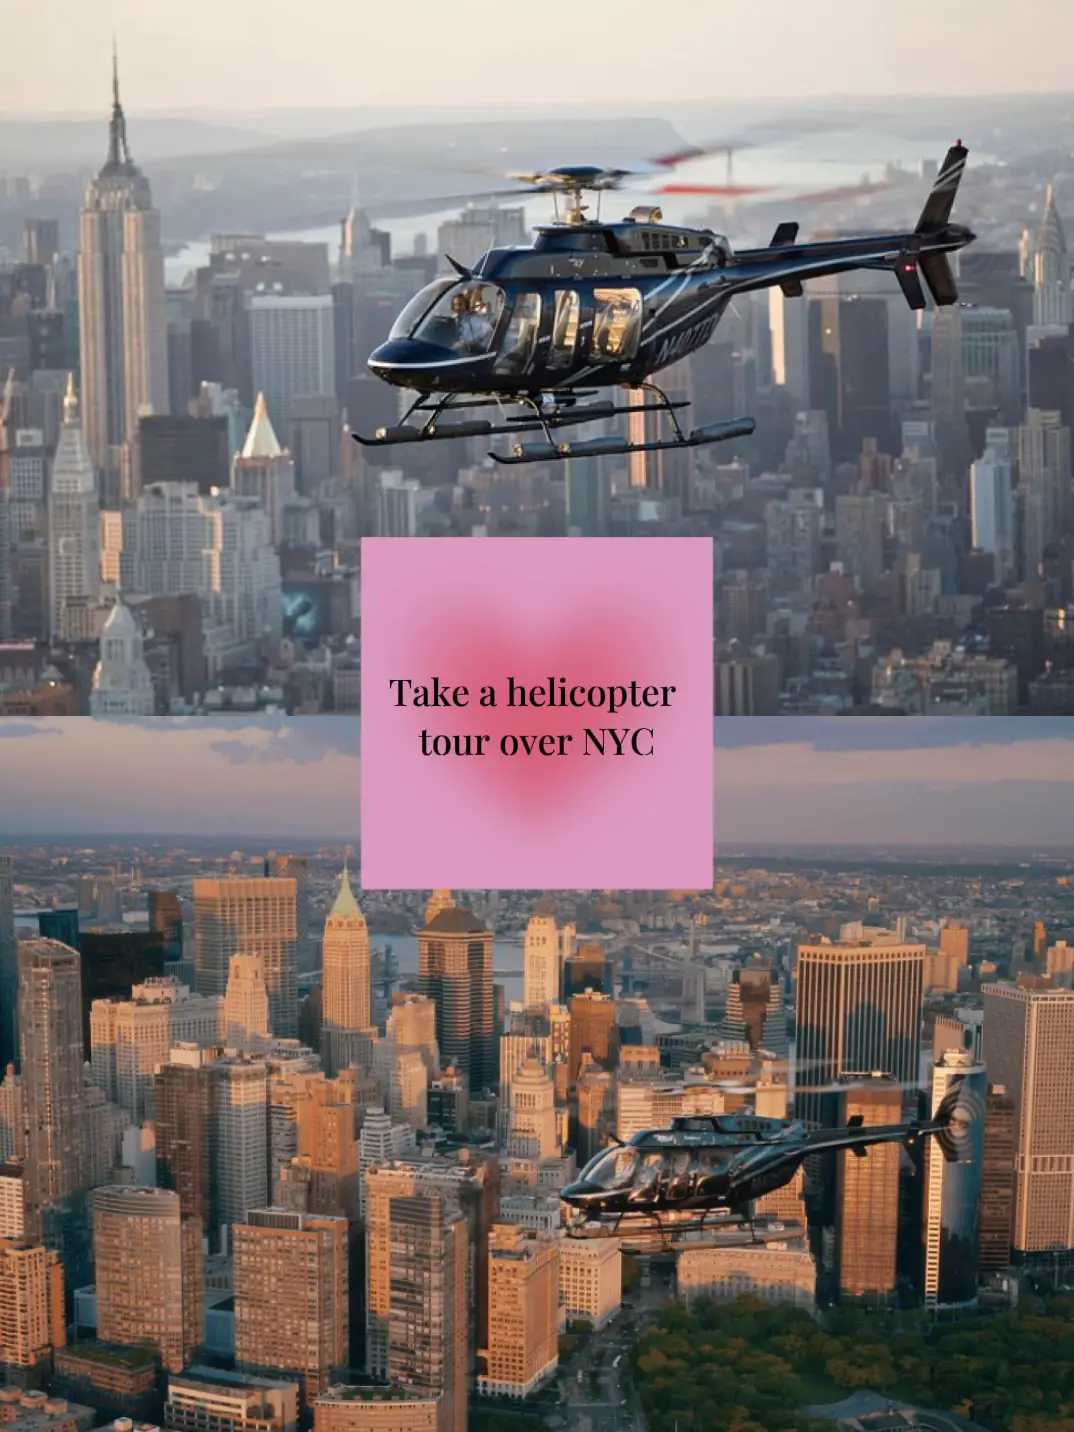  Two helicopter tours are flying over the city.